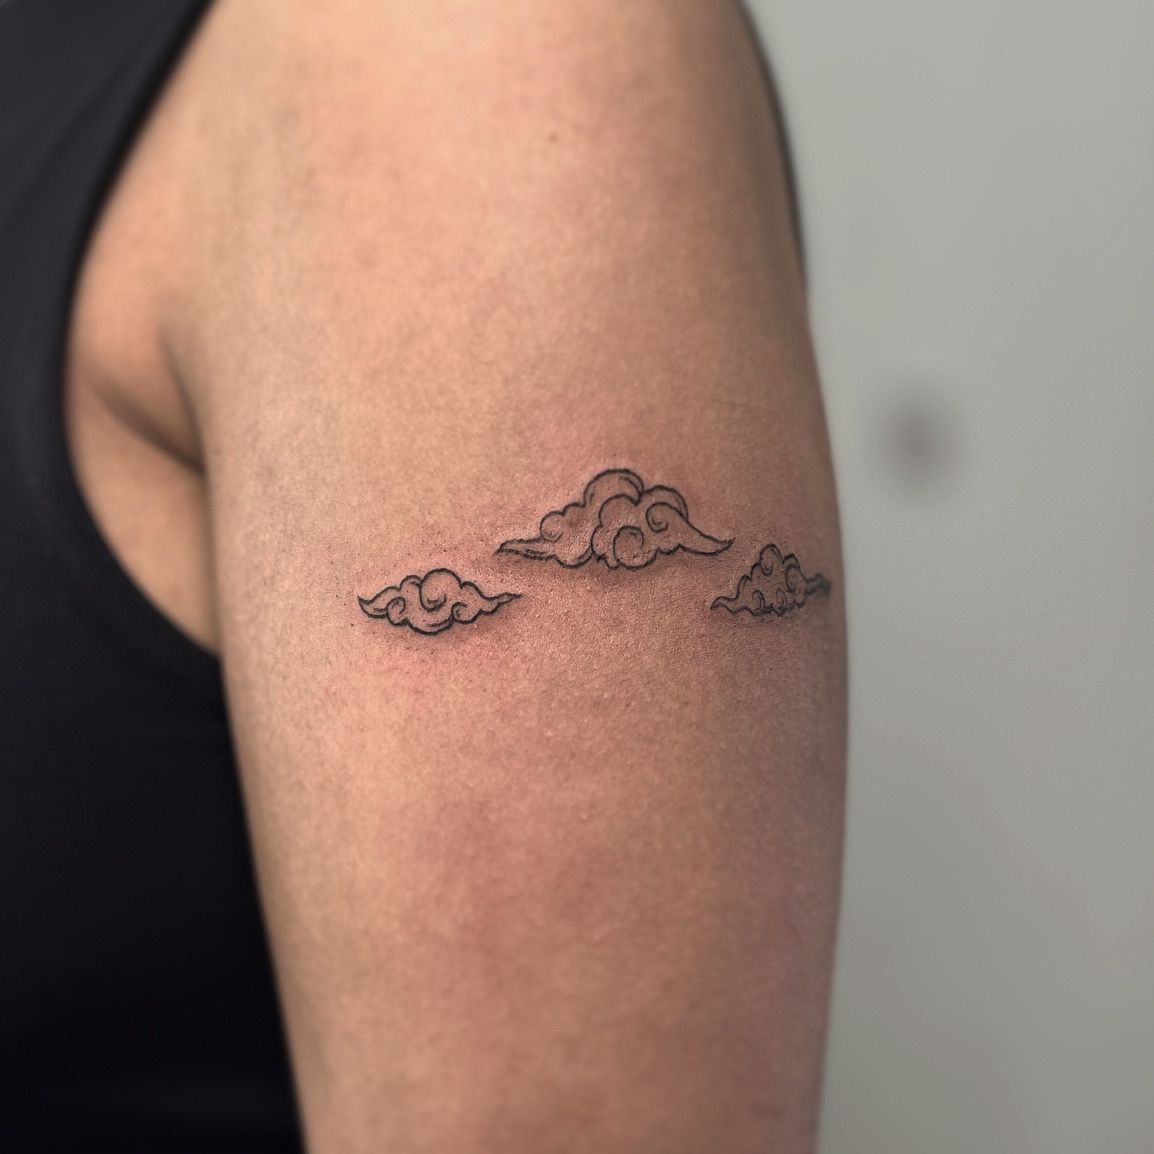 Tattoo tagged with: small, cloud, tiny, airplane window, travel, ifttt,  little, nature, realistic, doy, polaroid, inner forearm, medium size,  camera, other | inked-app.com